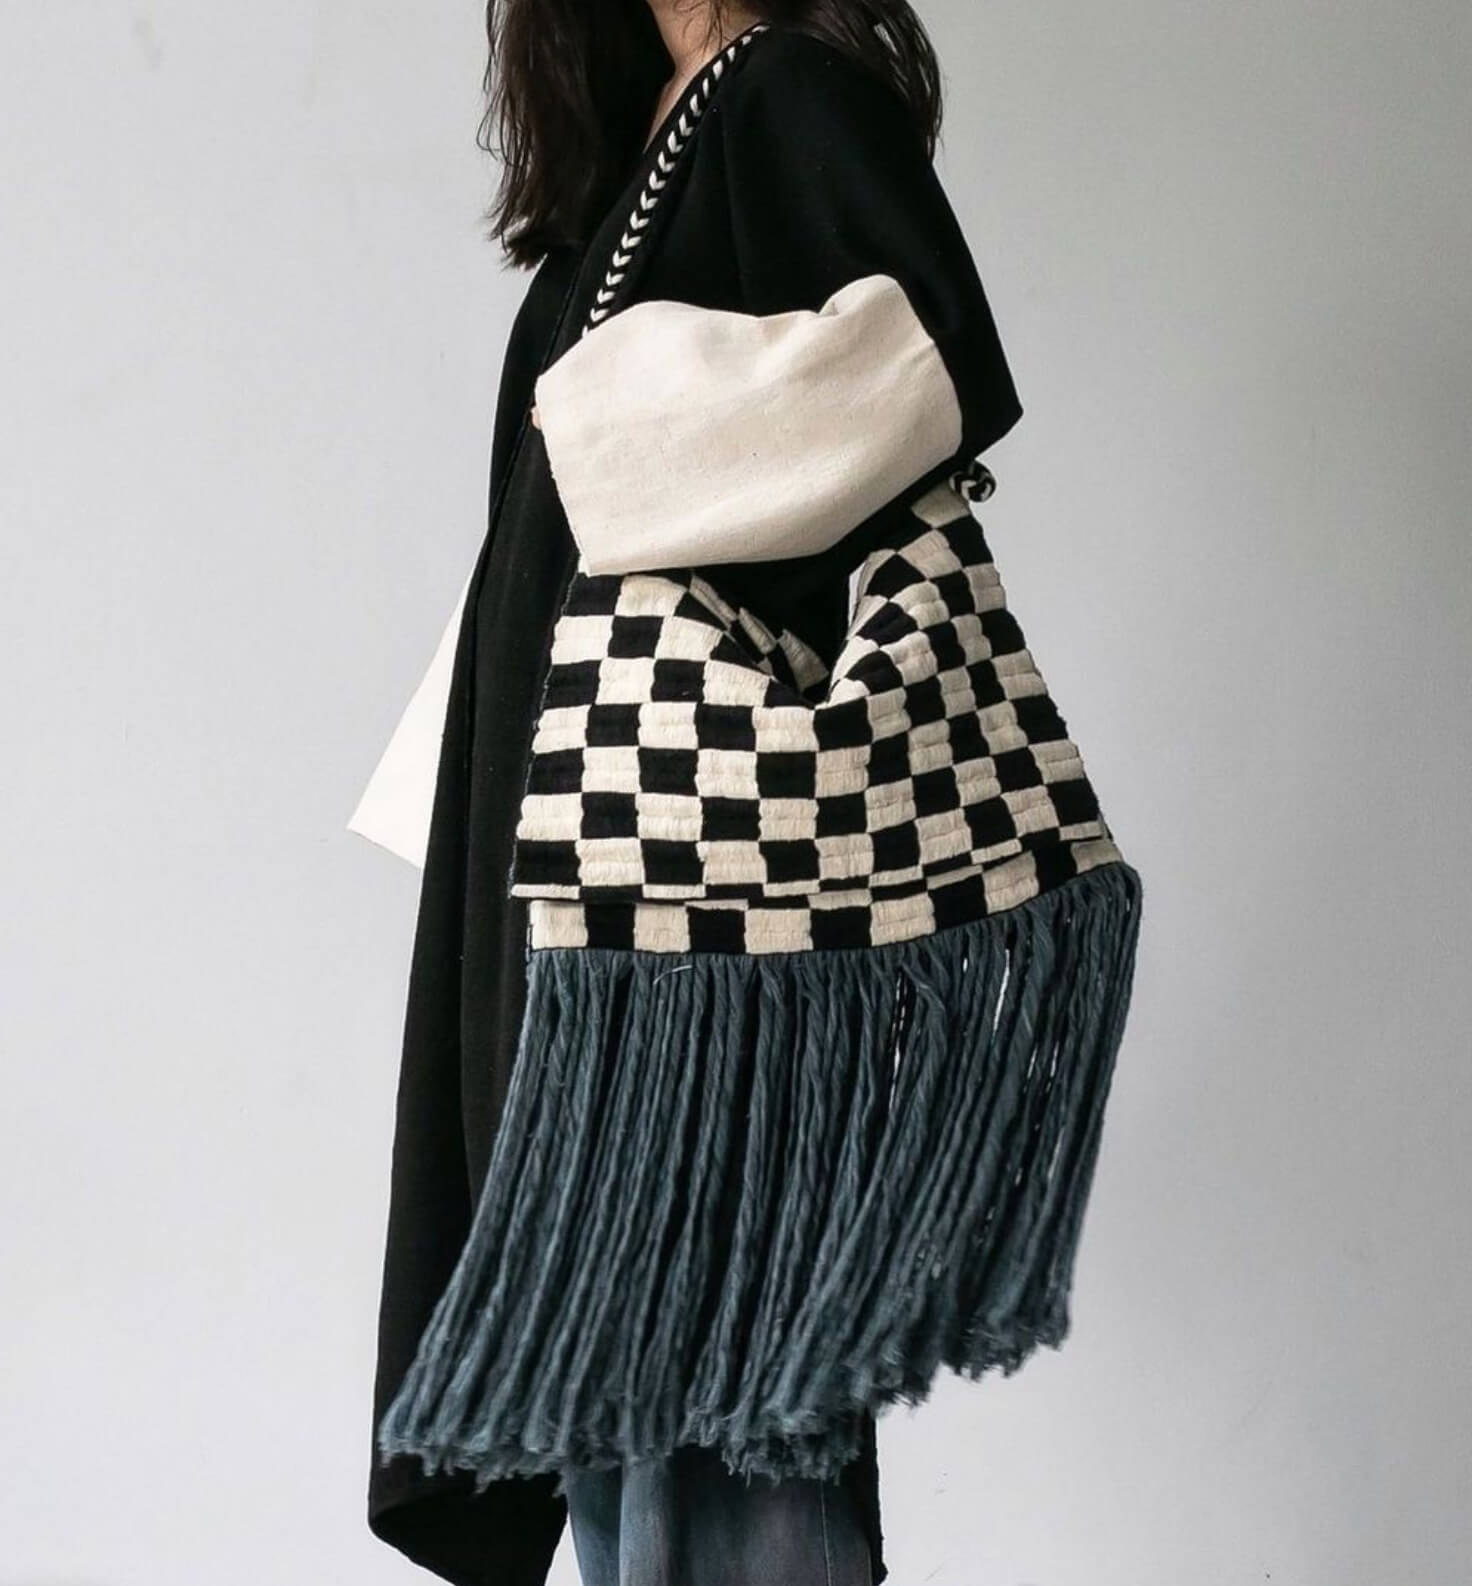 Get frisky in style. Adorned with long playful fringe, this checkered Karen shoulder bag is a wardrobe staple that will easily elevate your mood and style anytime of day